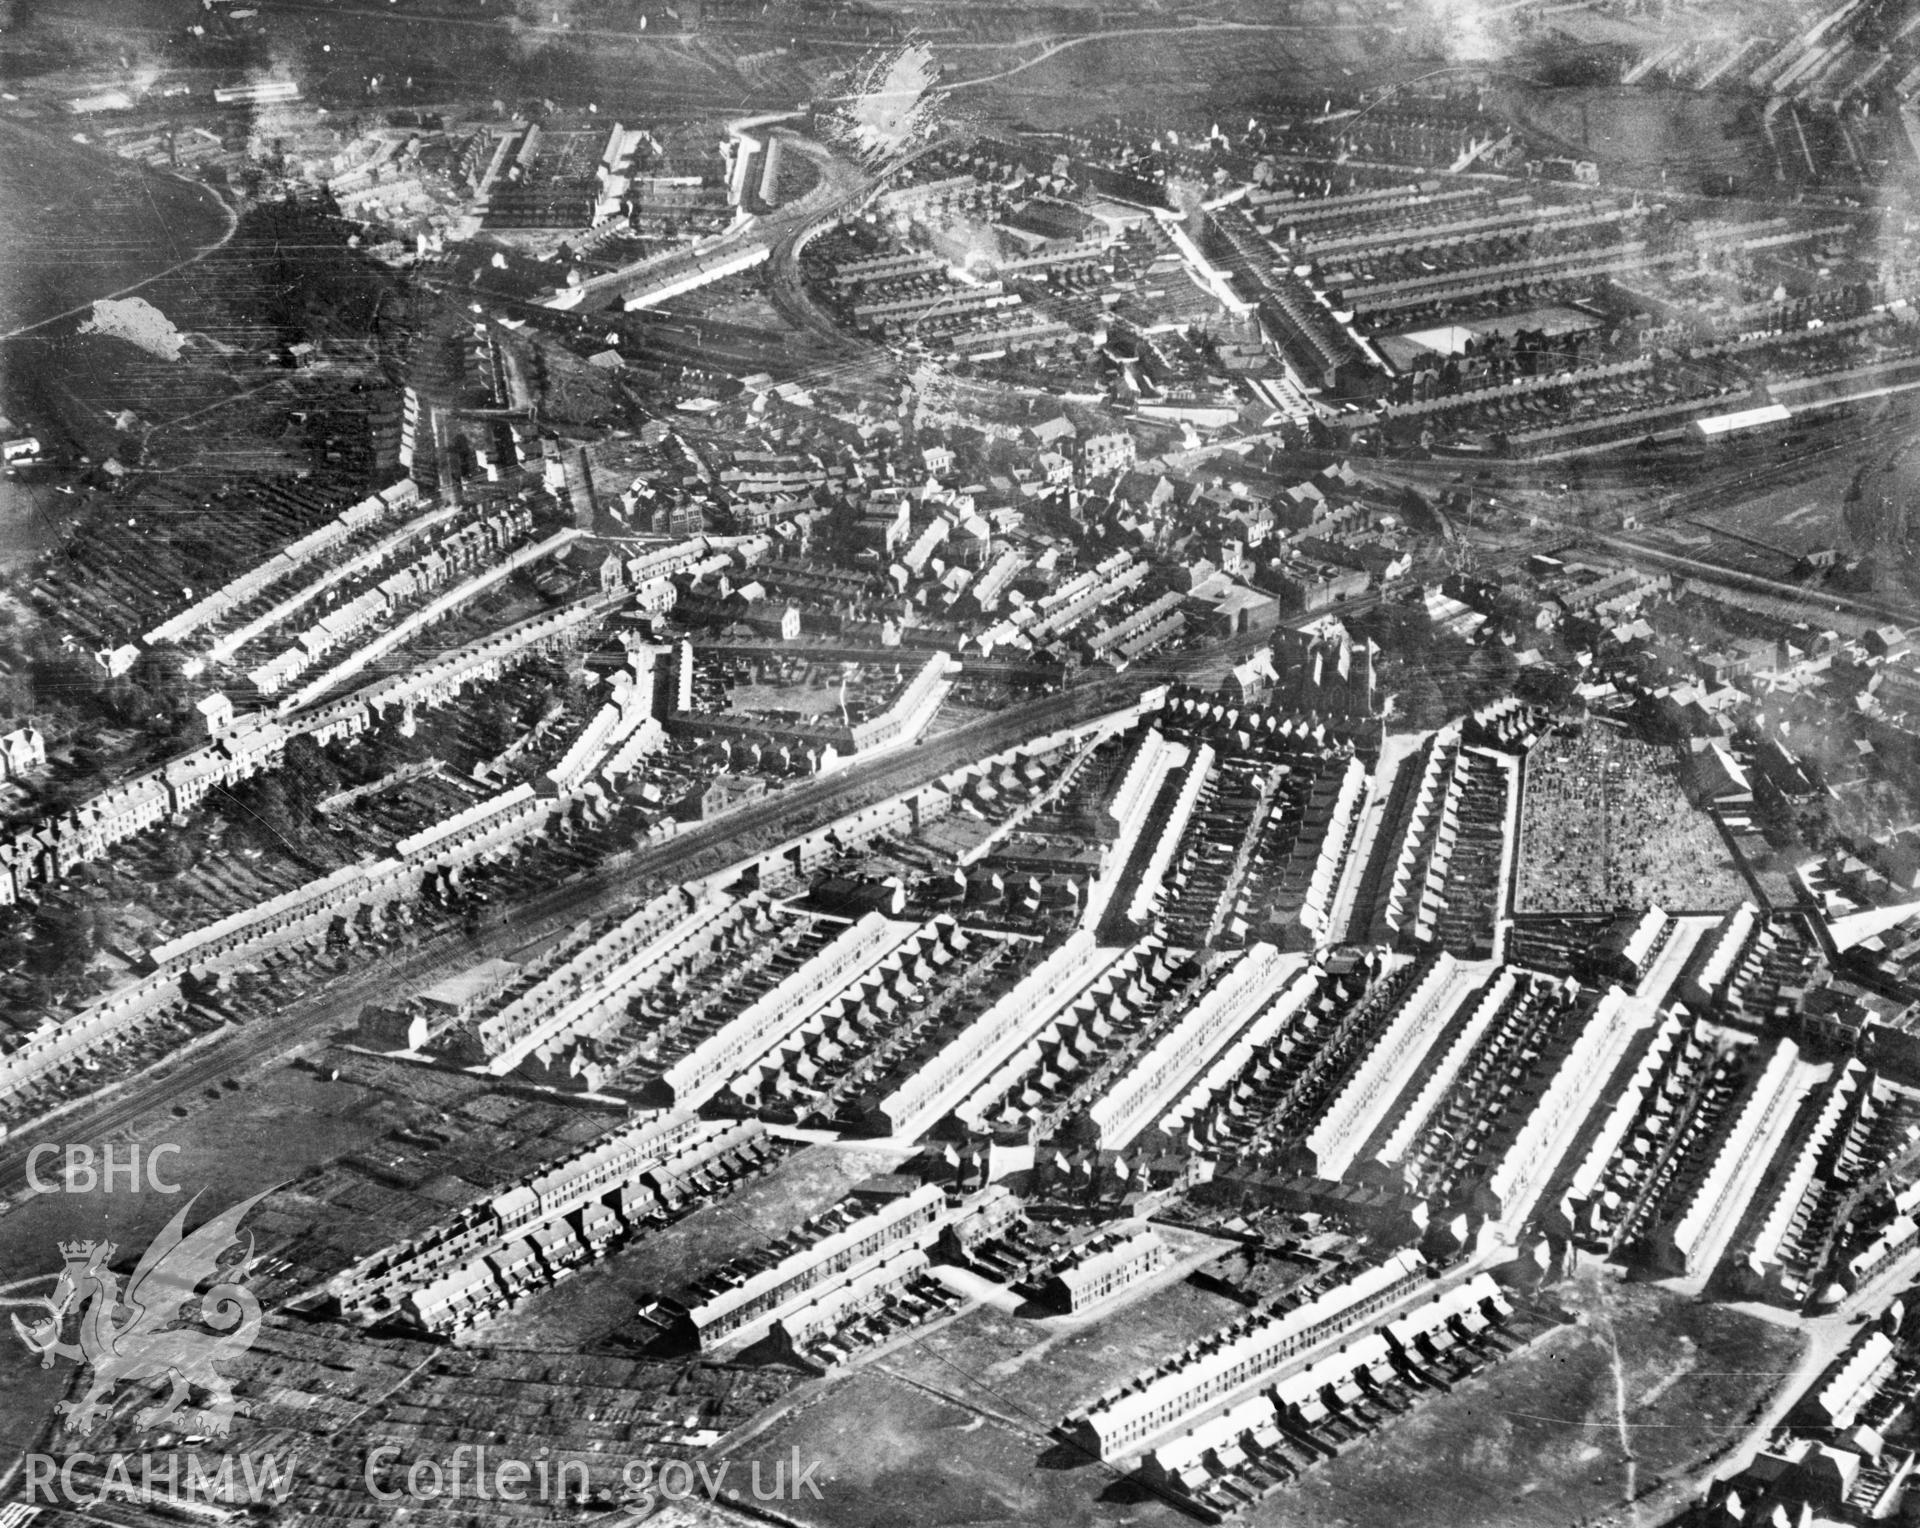 General view of Port Talbot. Oblique aerial photograph, 5?x4? BW glass plate.